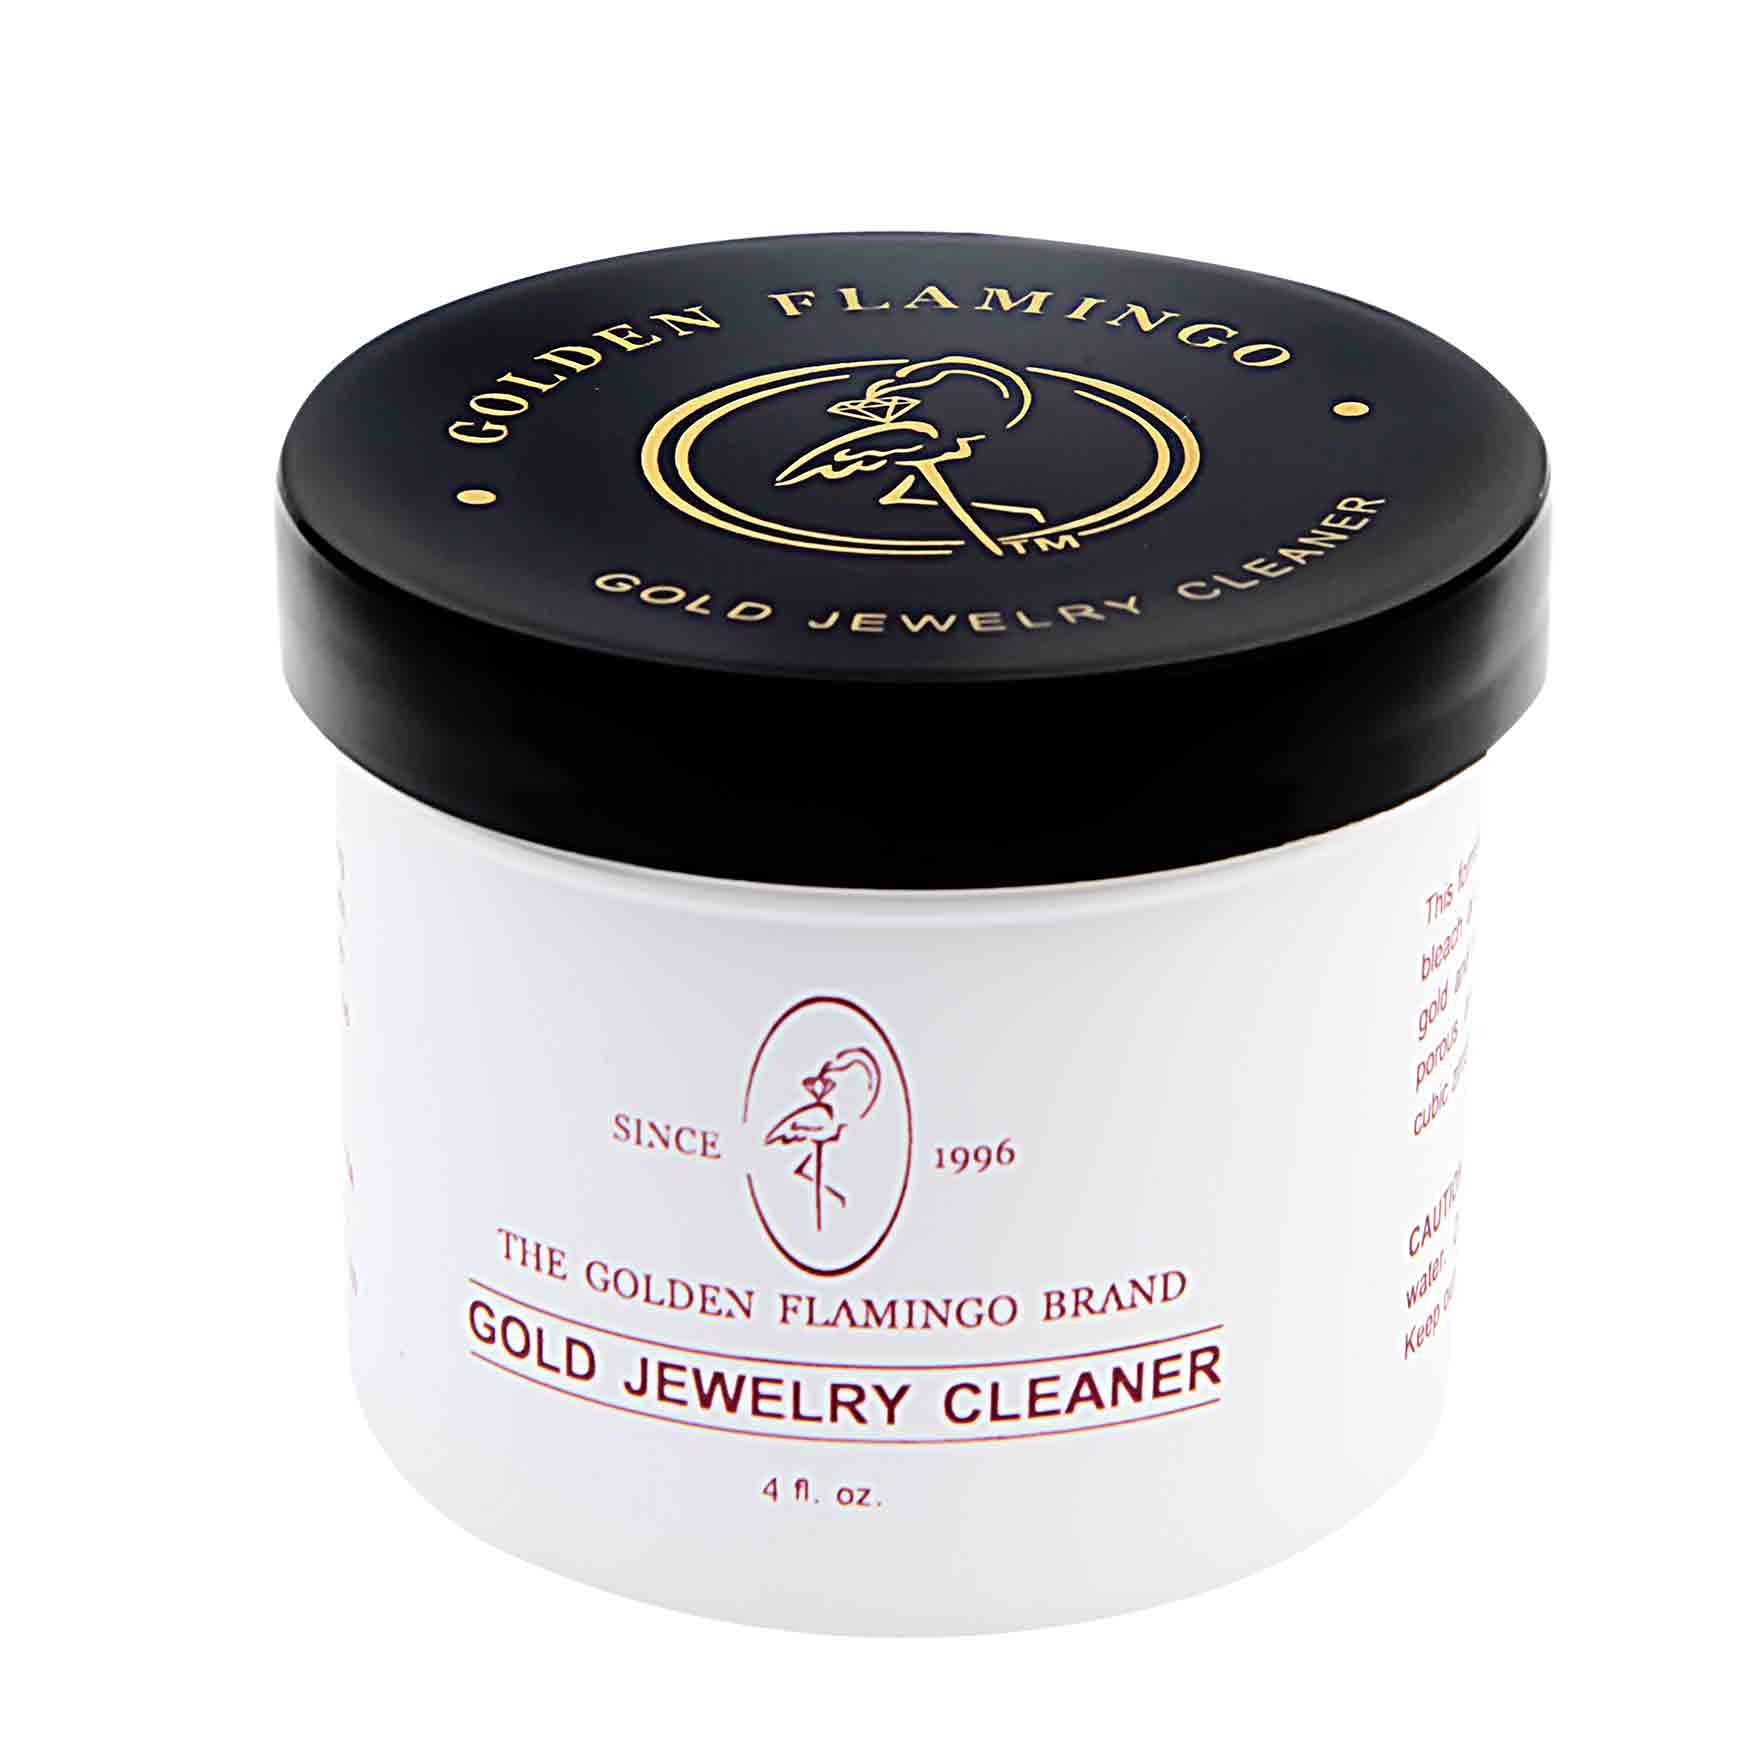 Gold jewelry cleaner